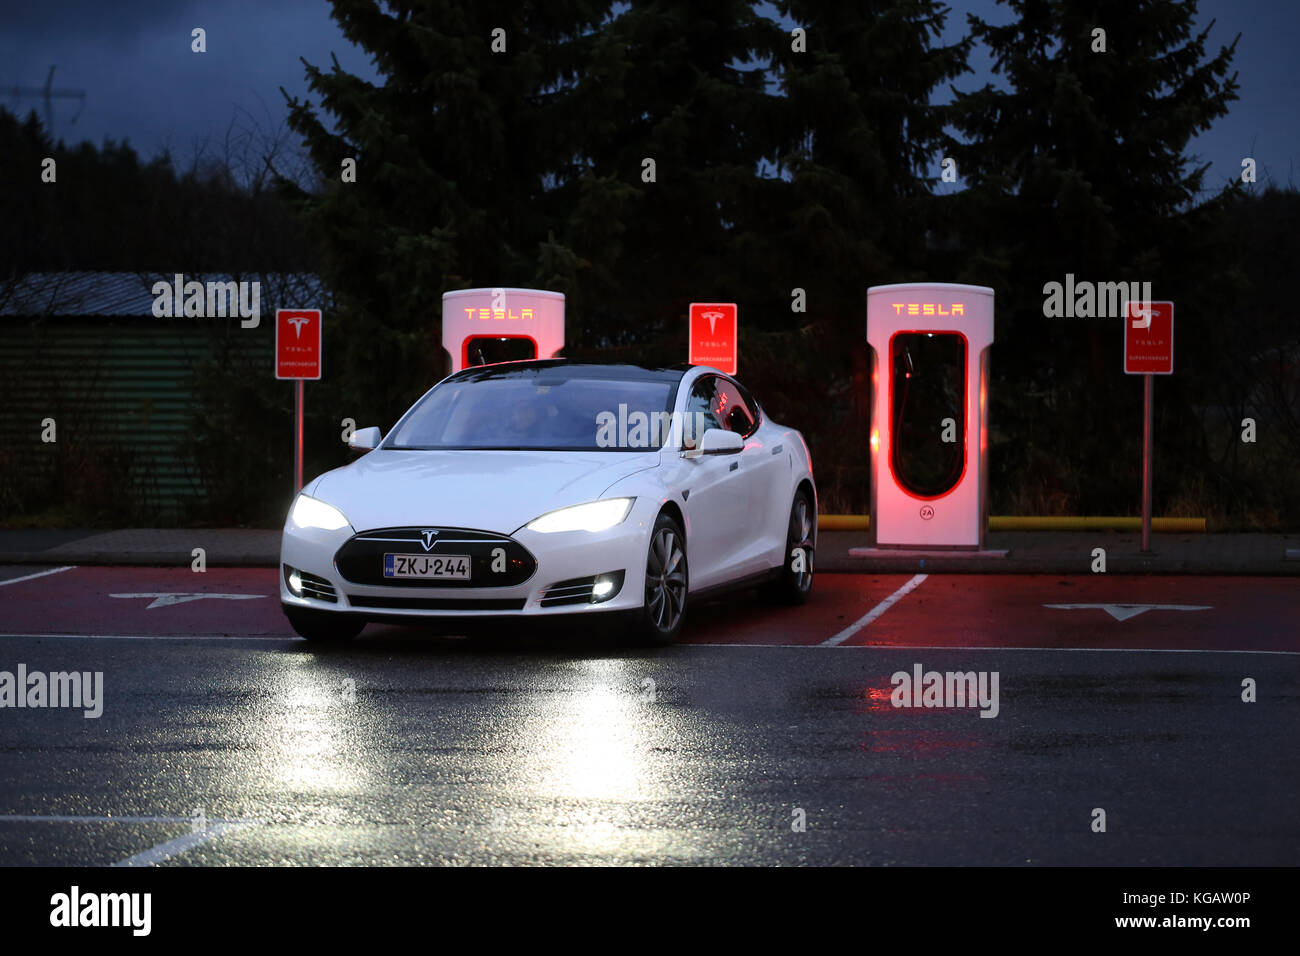 PAIMIO, FINLAND - NOVEMBER 14, 2015: Tesla Model S electric car arrives at the Paimio Tesla Supercharger station at night for charging. Tesla Supercha Stock Photo